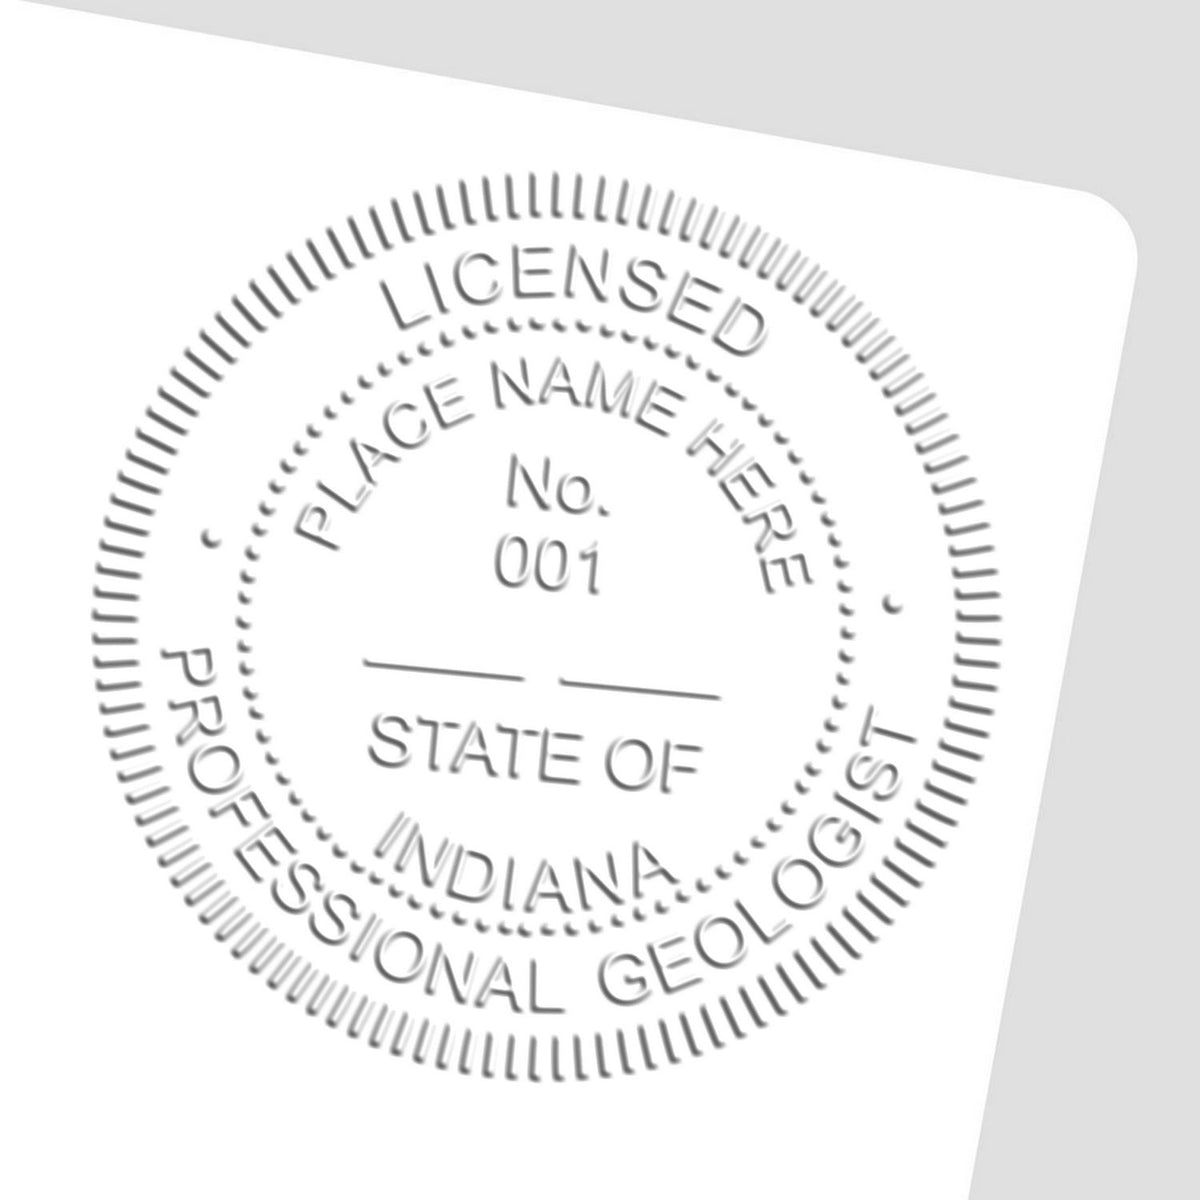 An in use photo of the Hybrid Indiana Geologist Seal showing a sample imprint on a cardstock